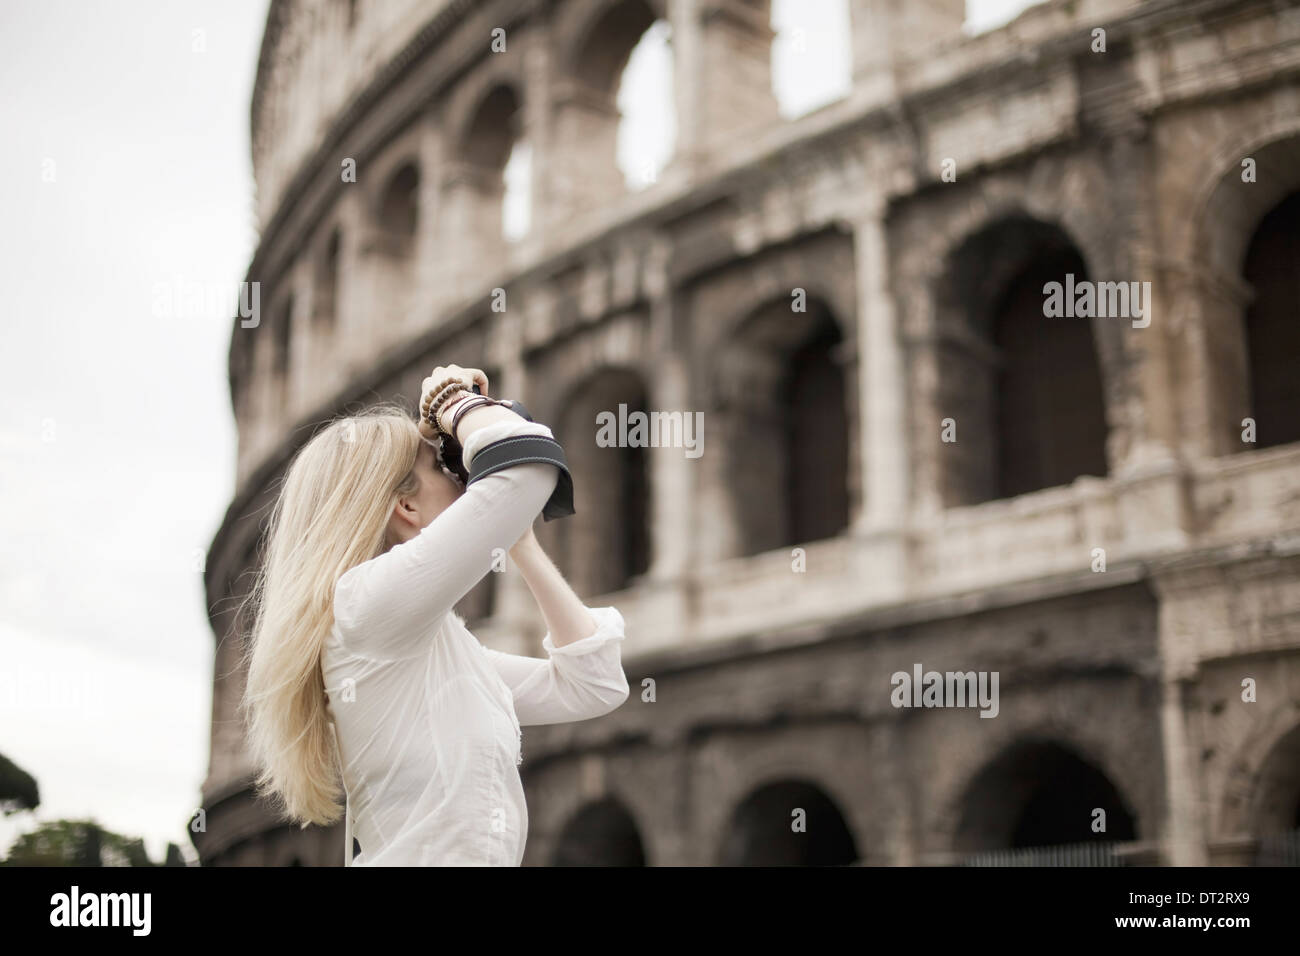 A woman outside the Colosseum amphitheatre in Rome taking photographs Stock Photo